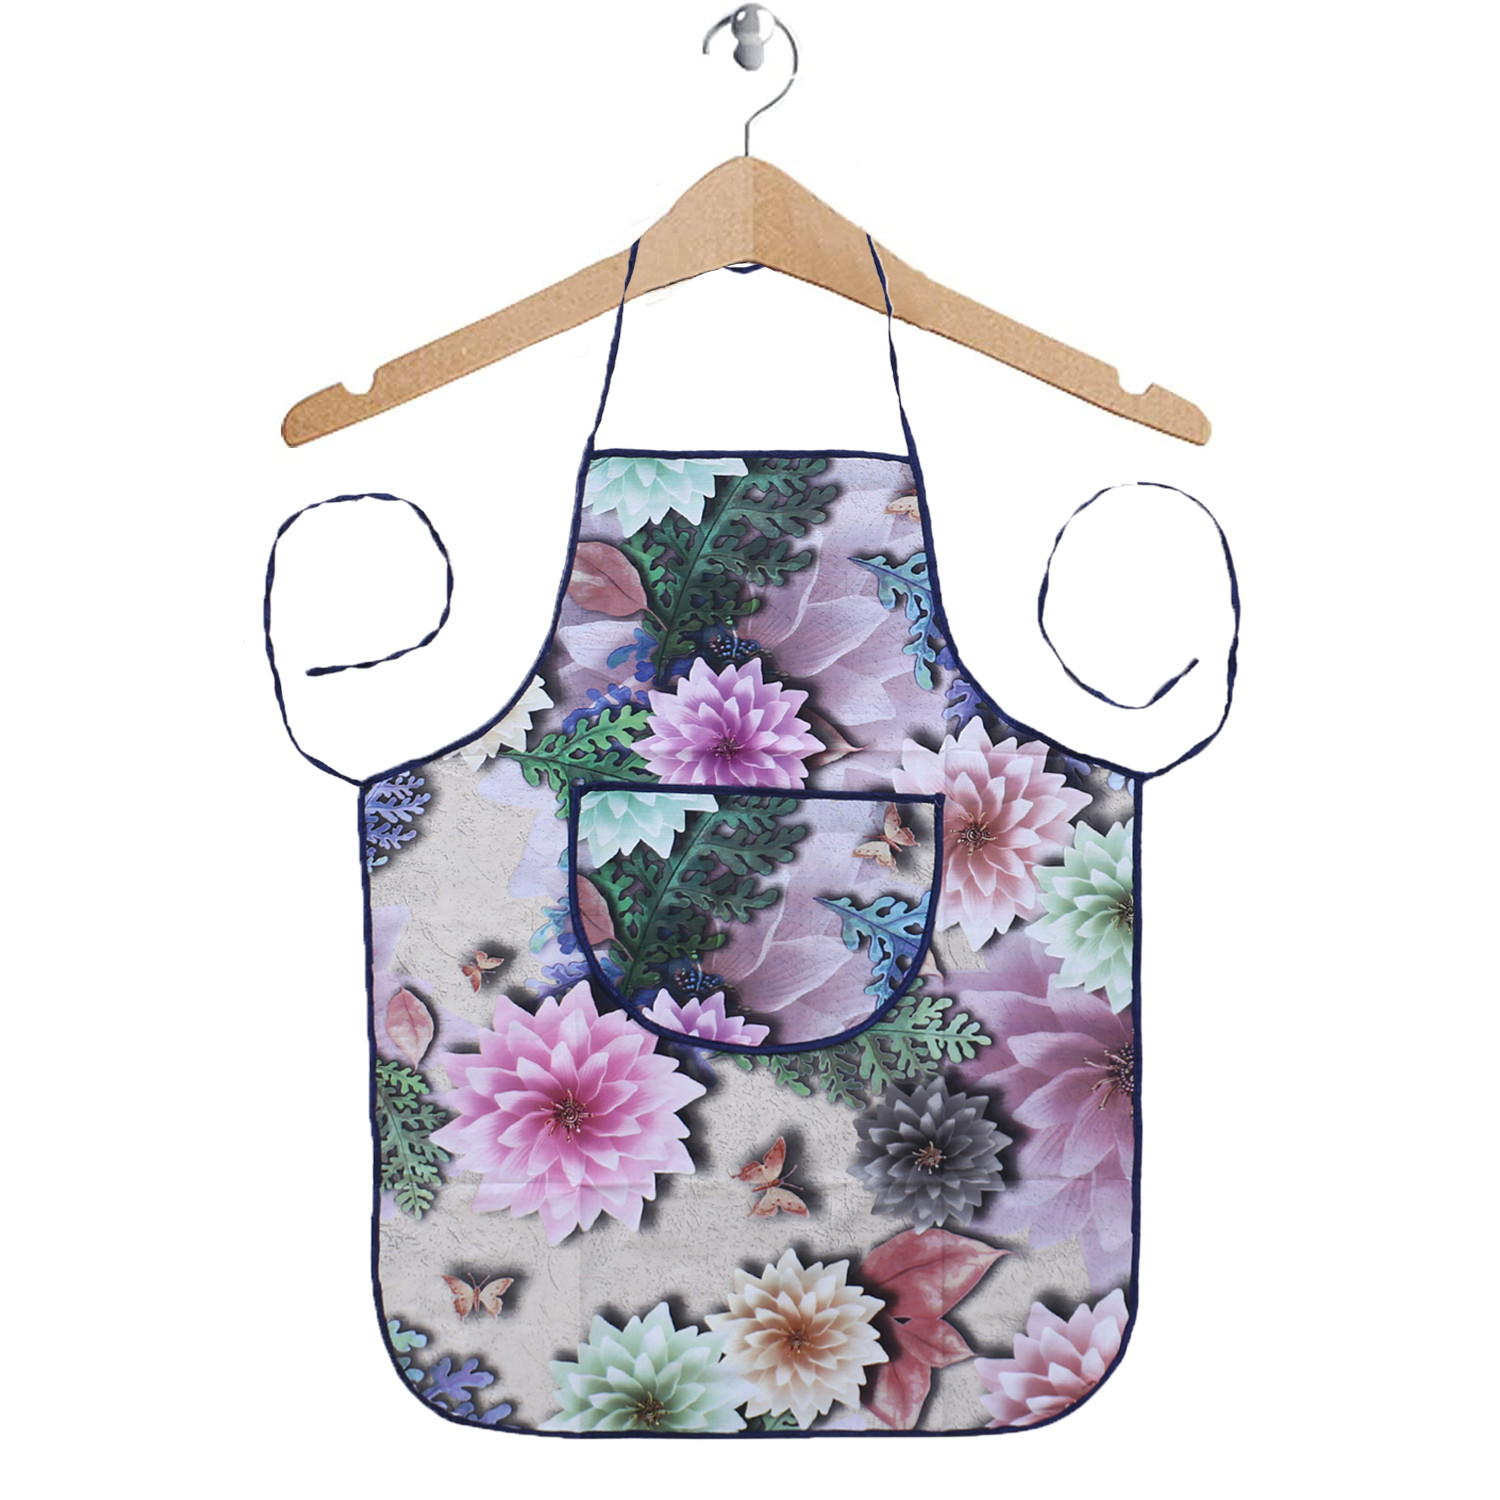 Kuber Industries Apron|PVC Unique Floral Printed Kitchen Chef Cloth|Waterproof Centre Pocket Apron With Tying Cord for Men & Women (Multicolor)